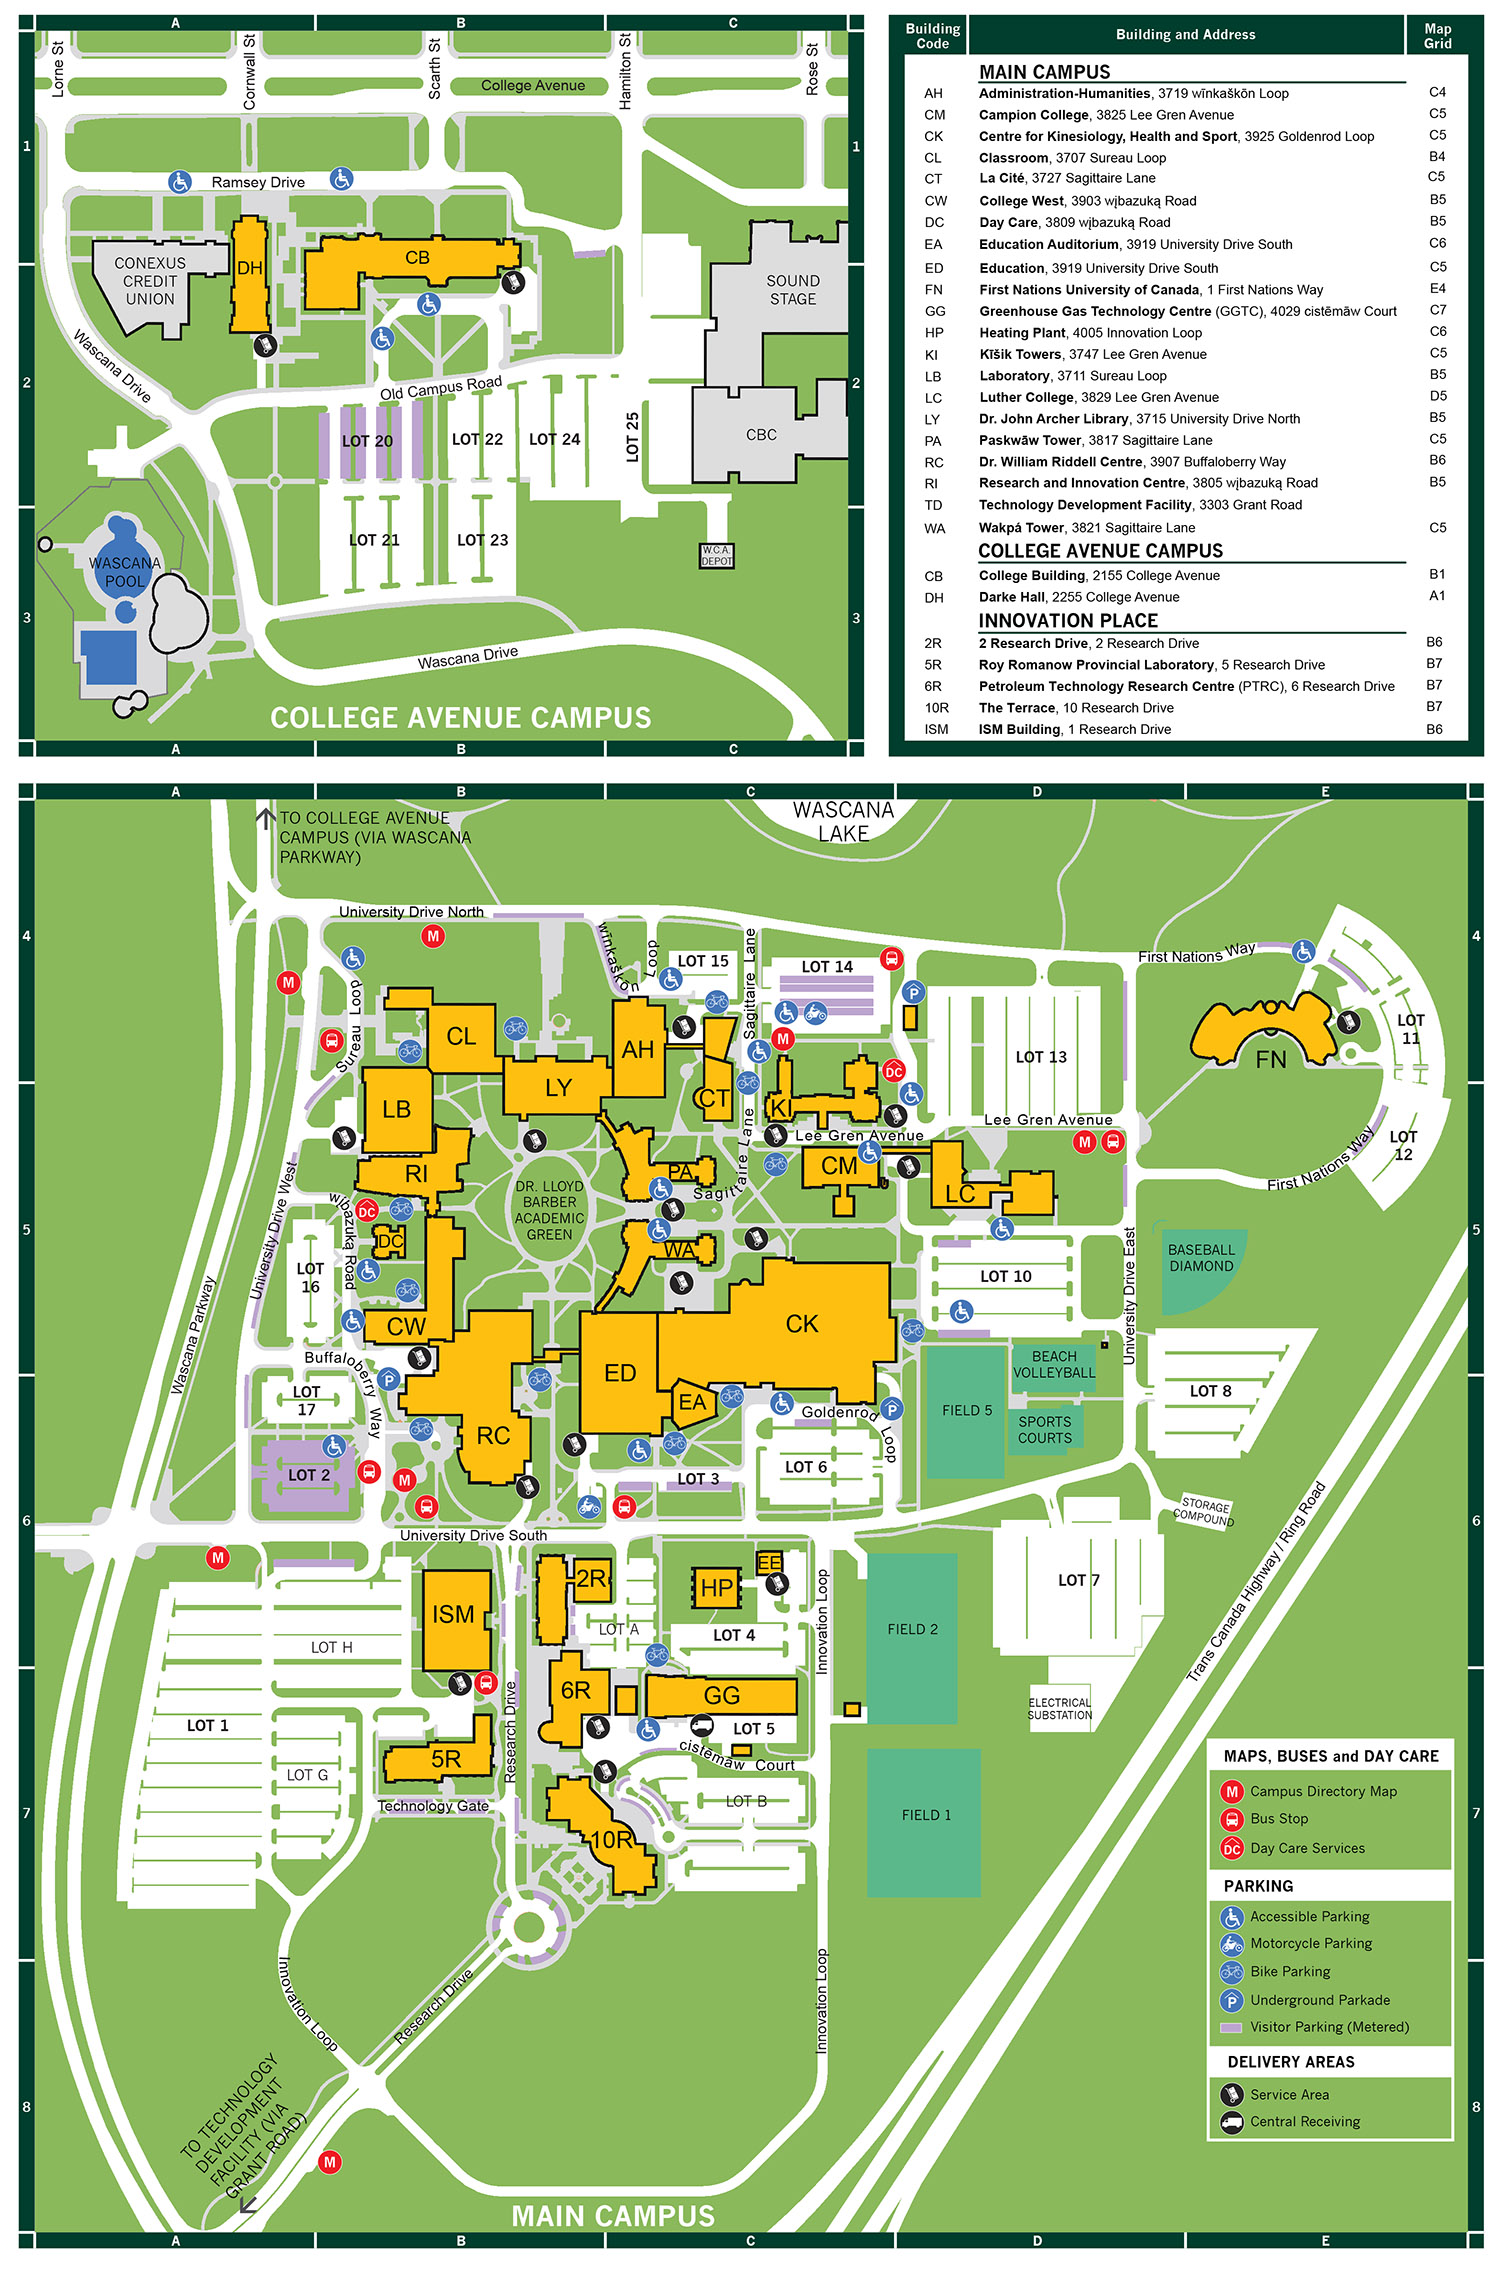 u of c parking map Campus Maps And Directions Contact Us University Of Regina u of c parking map